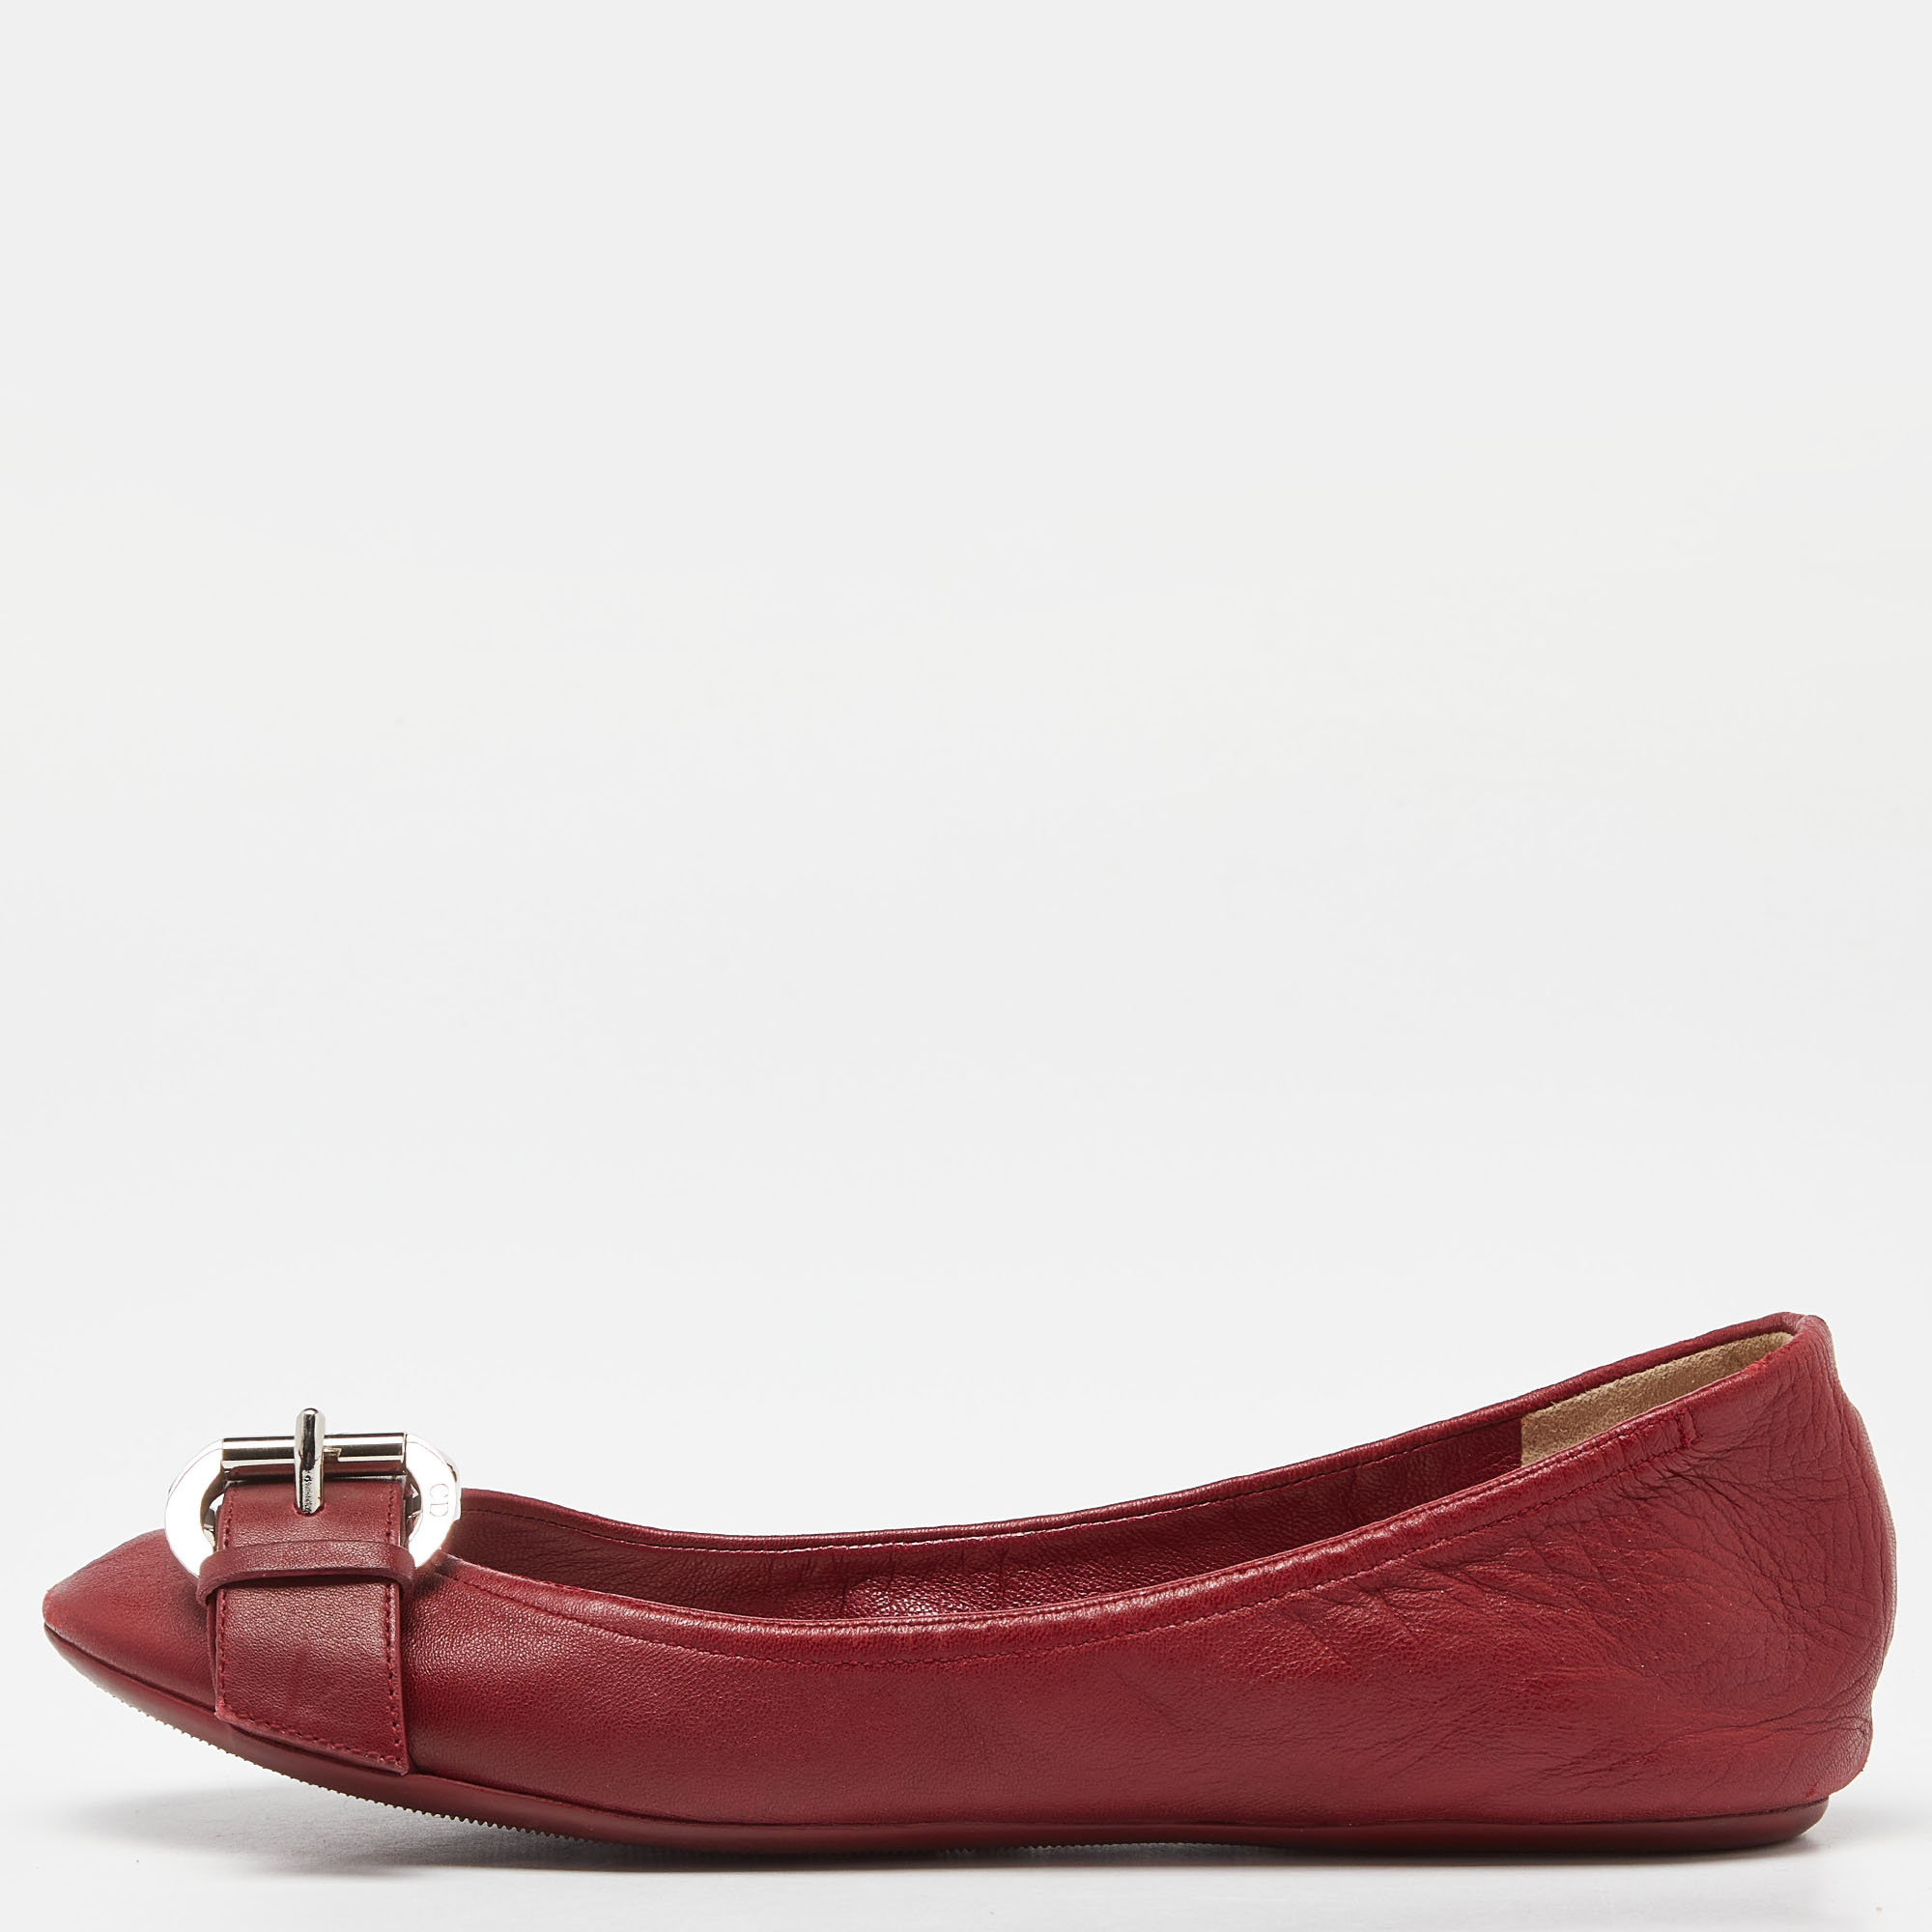 Pre-owned Dior Red Leather Buckle Ballet Flats Size 37